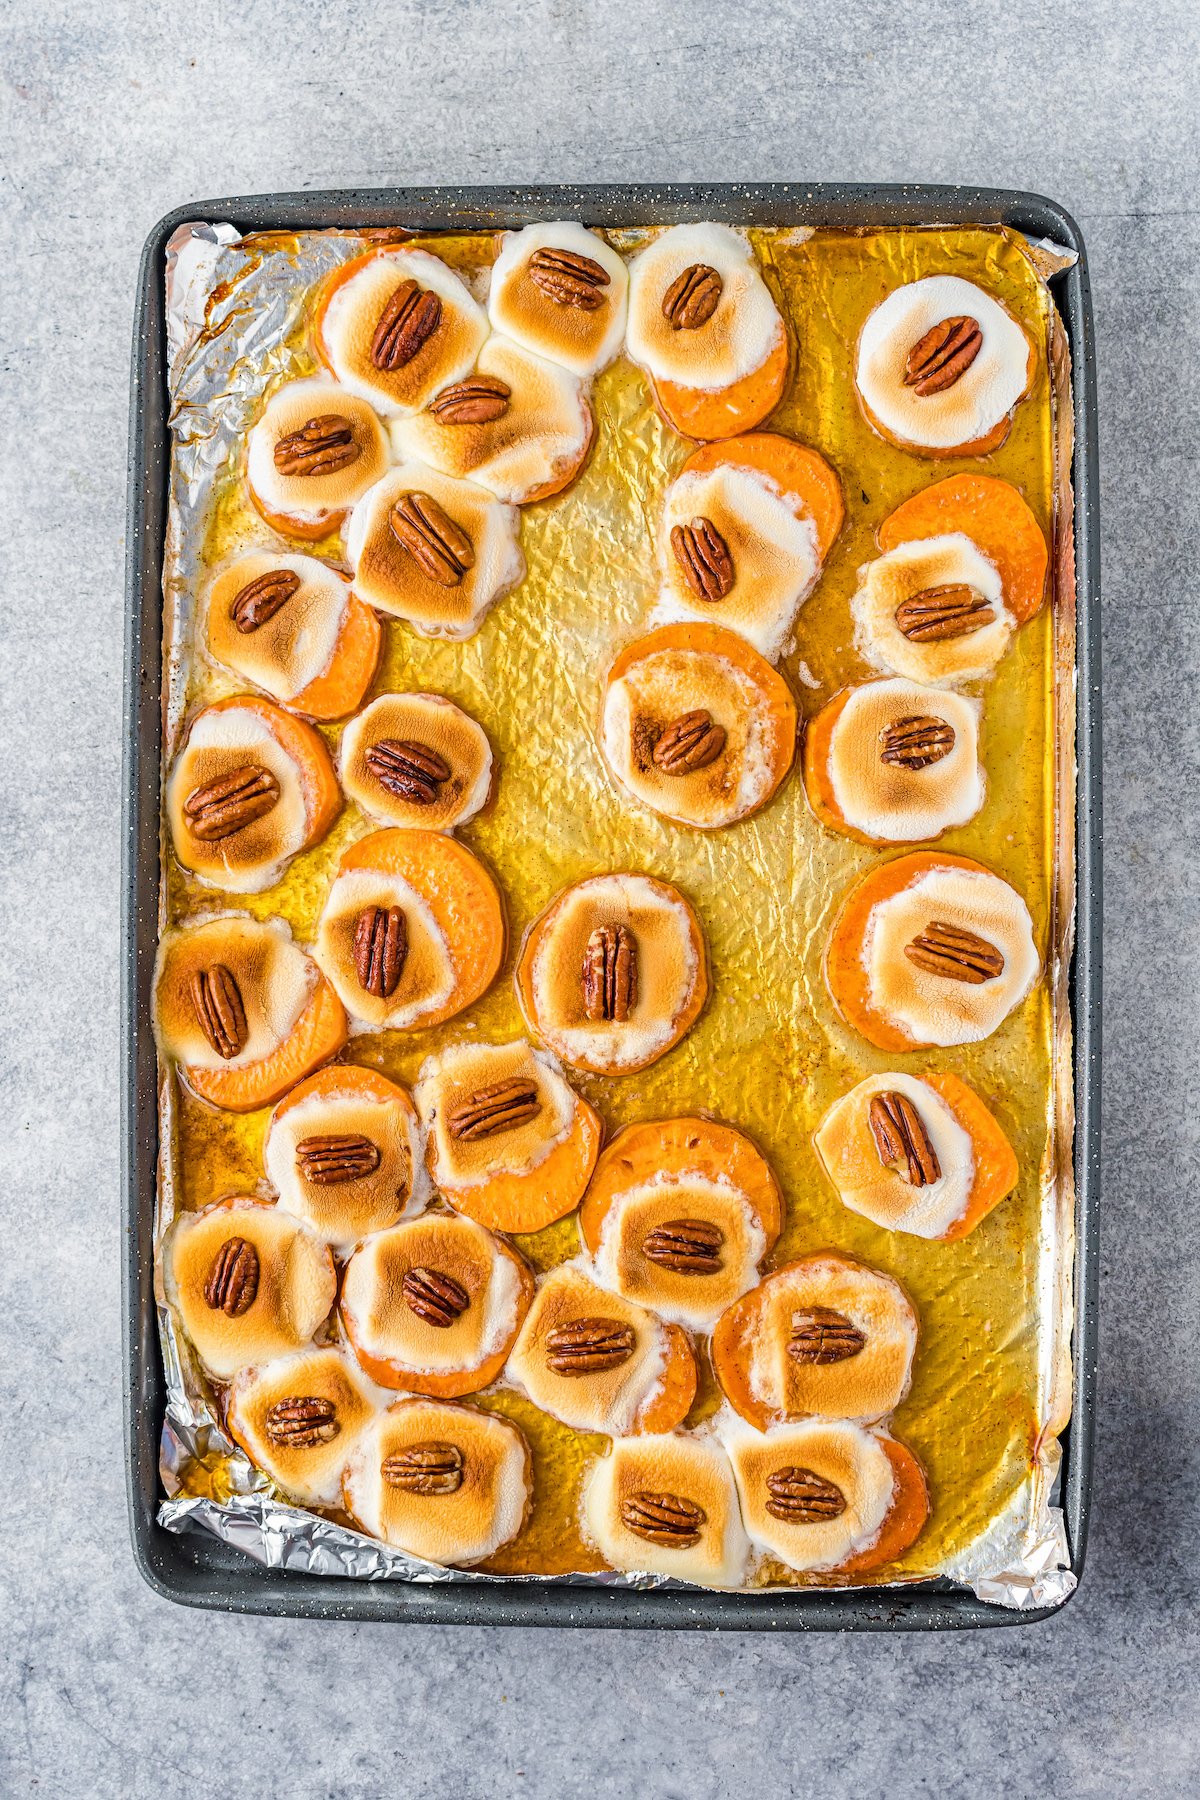 Baked sweet potato bites with melted marshmallows and pecans on top.